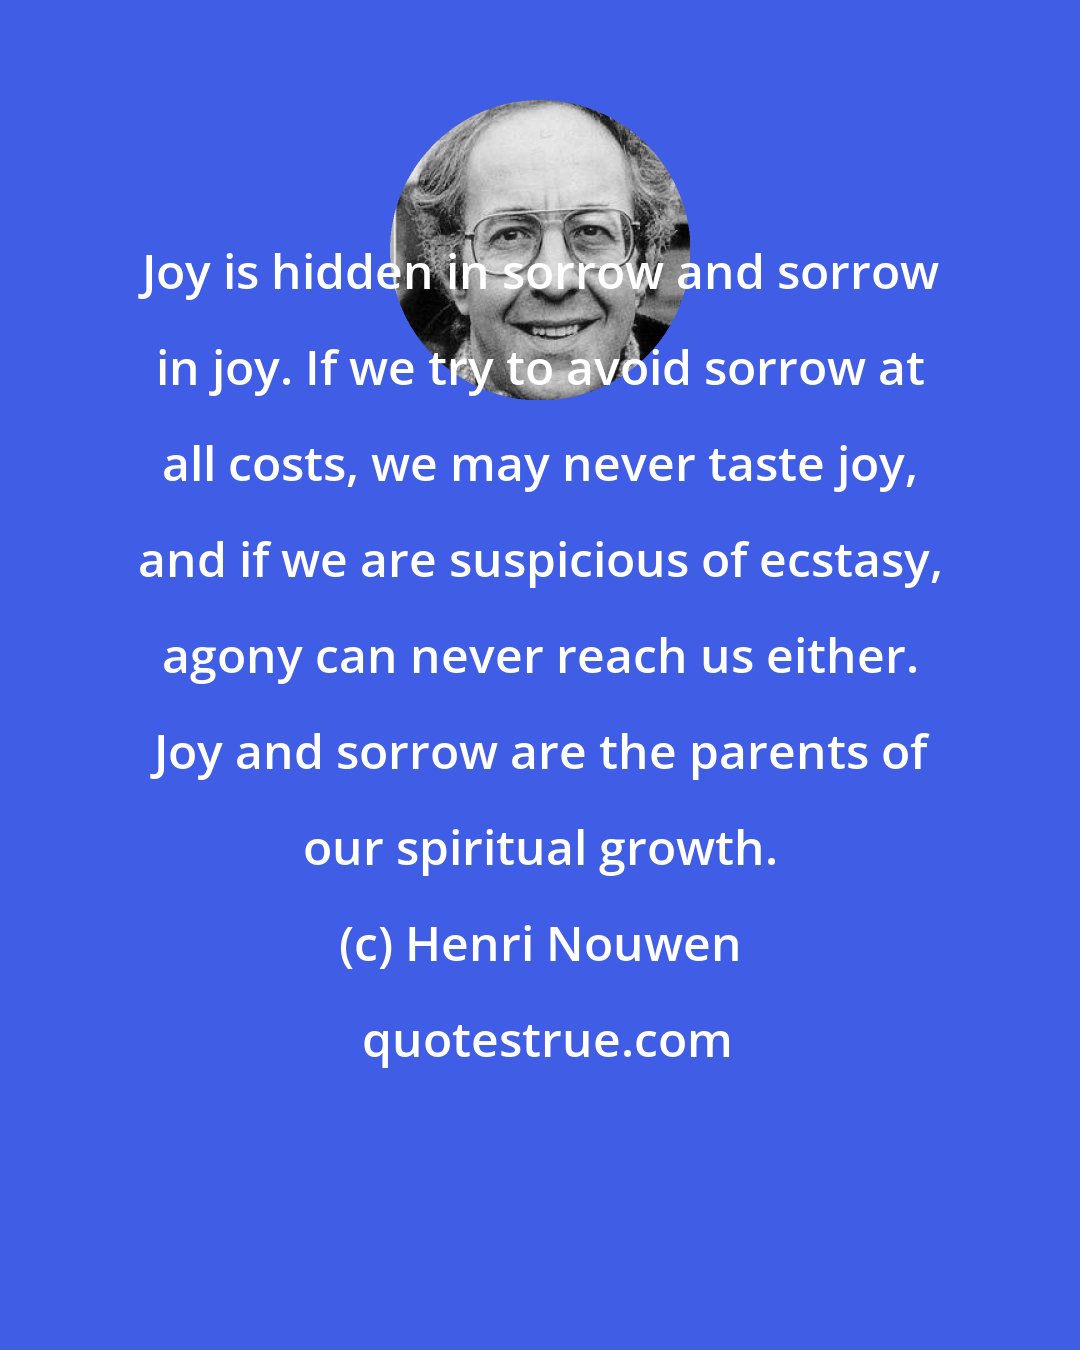 Henri Nouwen: Joy is hidden in sorrow and sorrow in joy. If we try to avoid sorrow at all costs, we may never taste joy, and if we are suspicious of ecstasy, agony can never reach us either. Joy and sorrow are the parents of our spiritual growth.